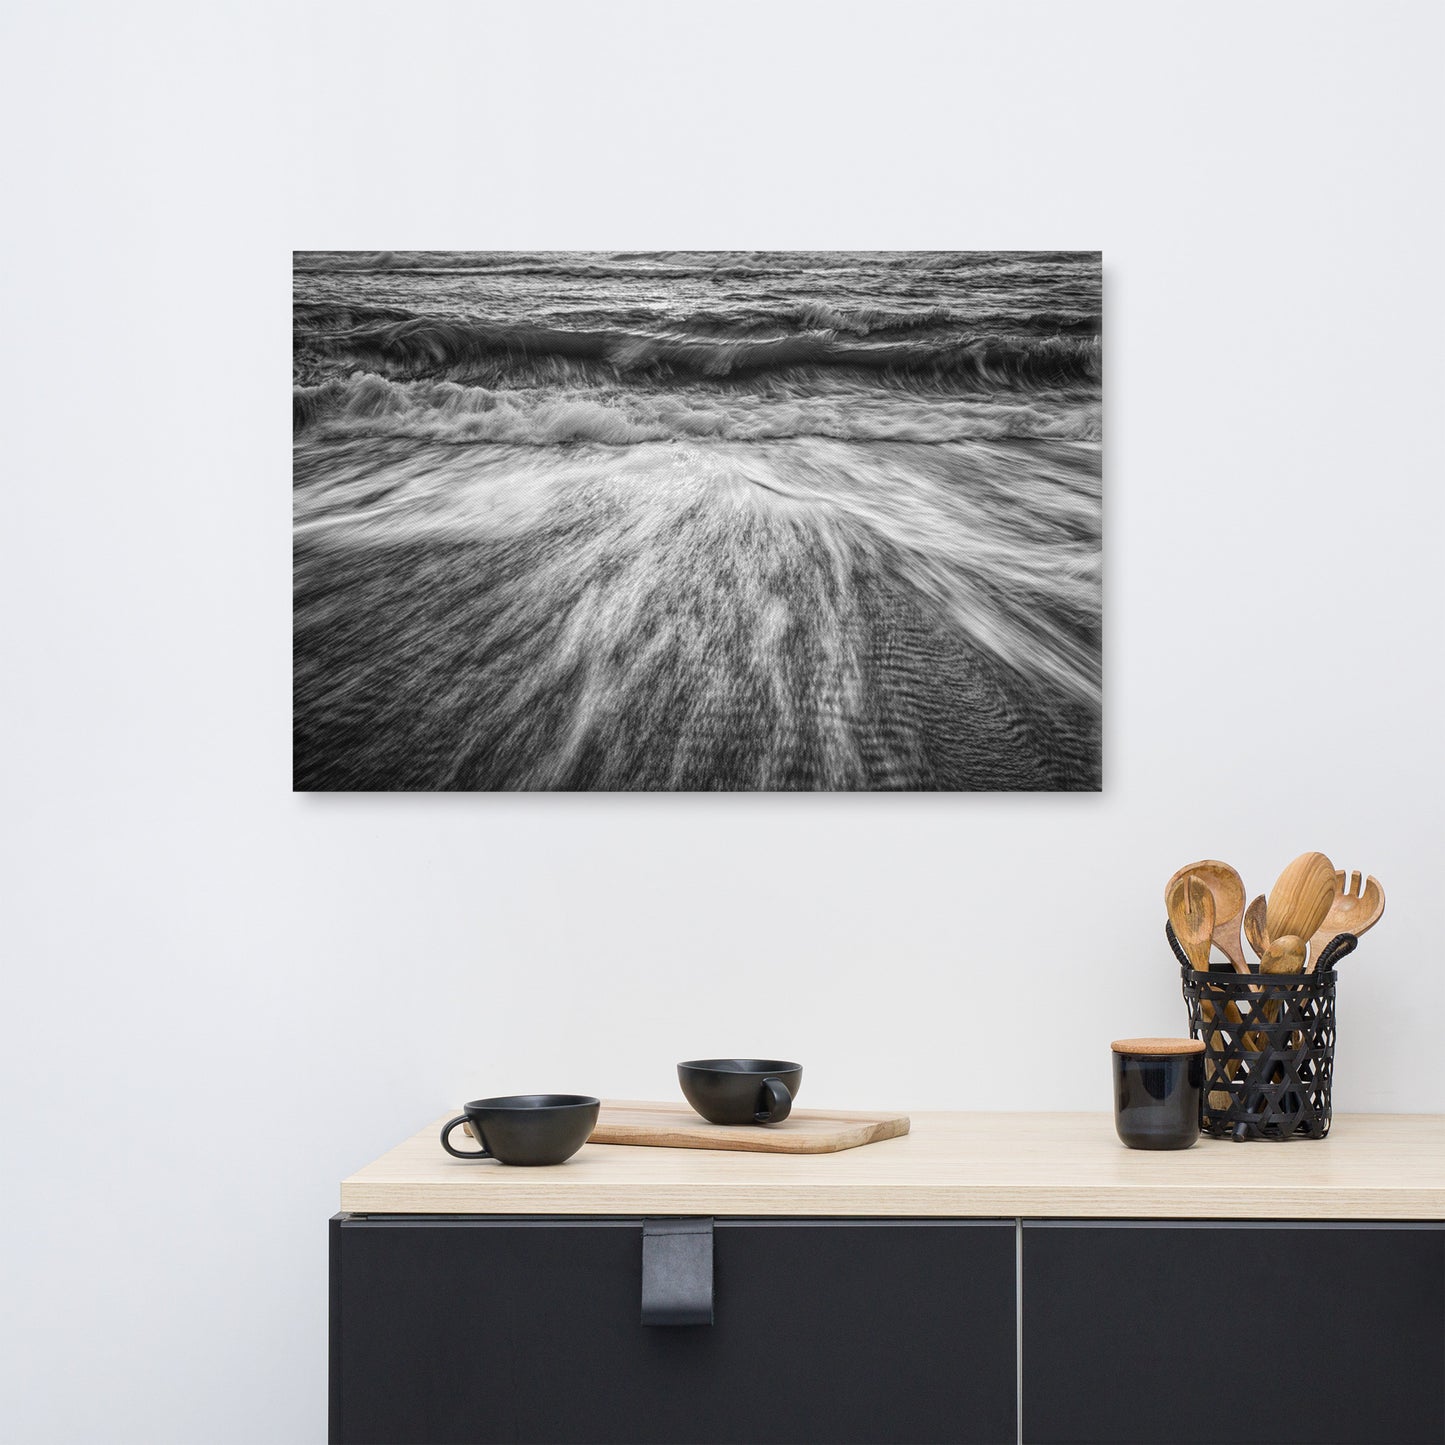 Washing Out to Sea Black and White Coastal Nature Photograph Canvas Wall Art Prints